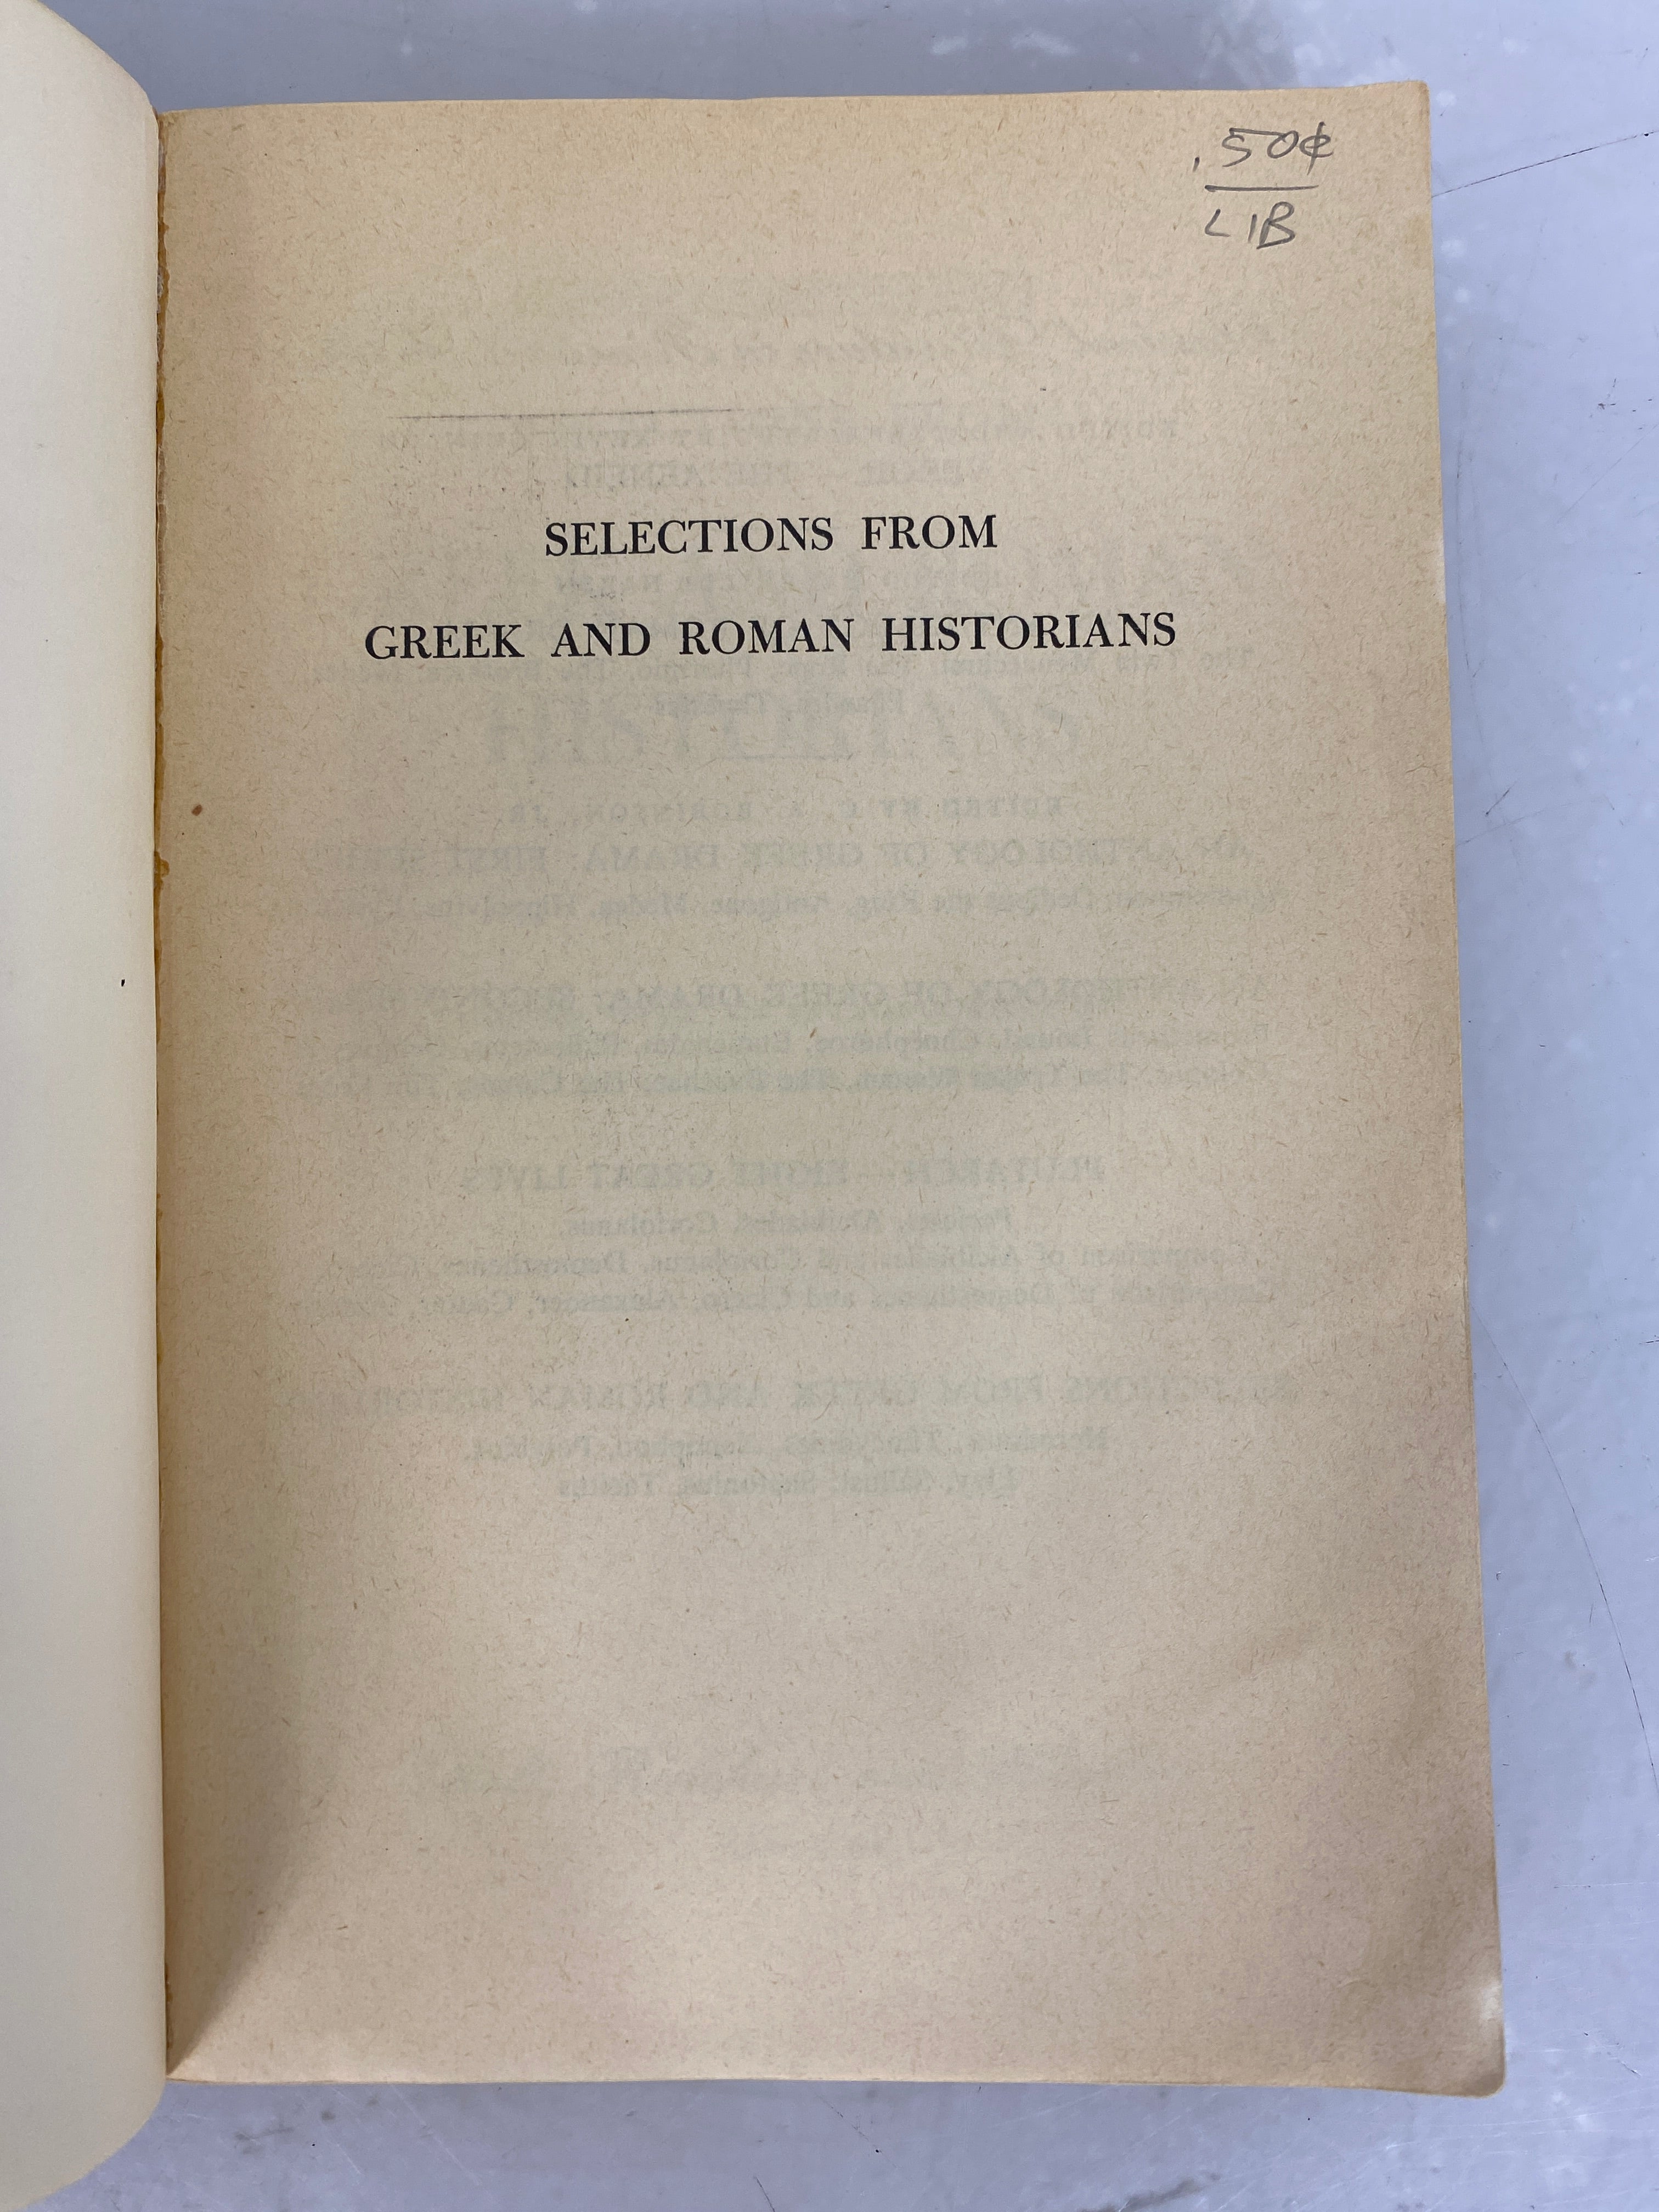 Selections From Greek and Roman Historians by C.A. Robinson, Jr. 1963 SC